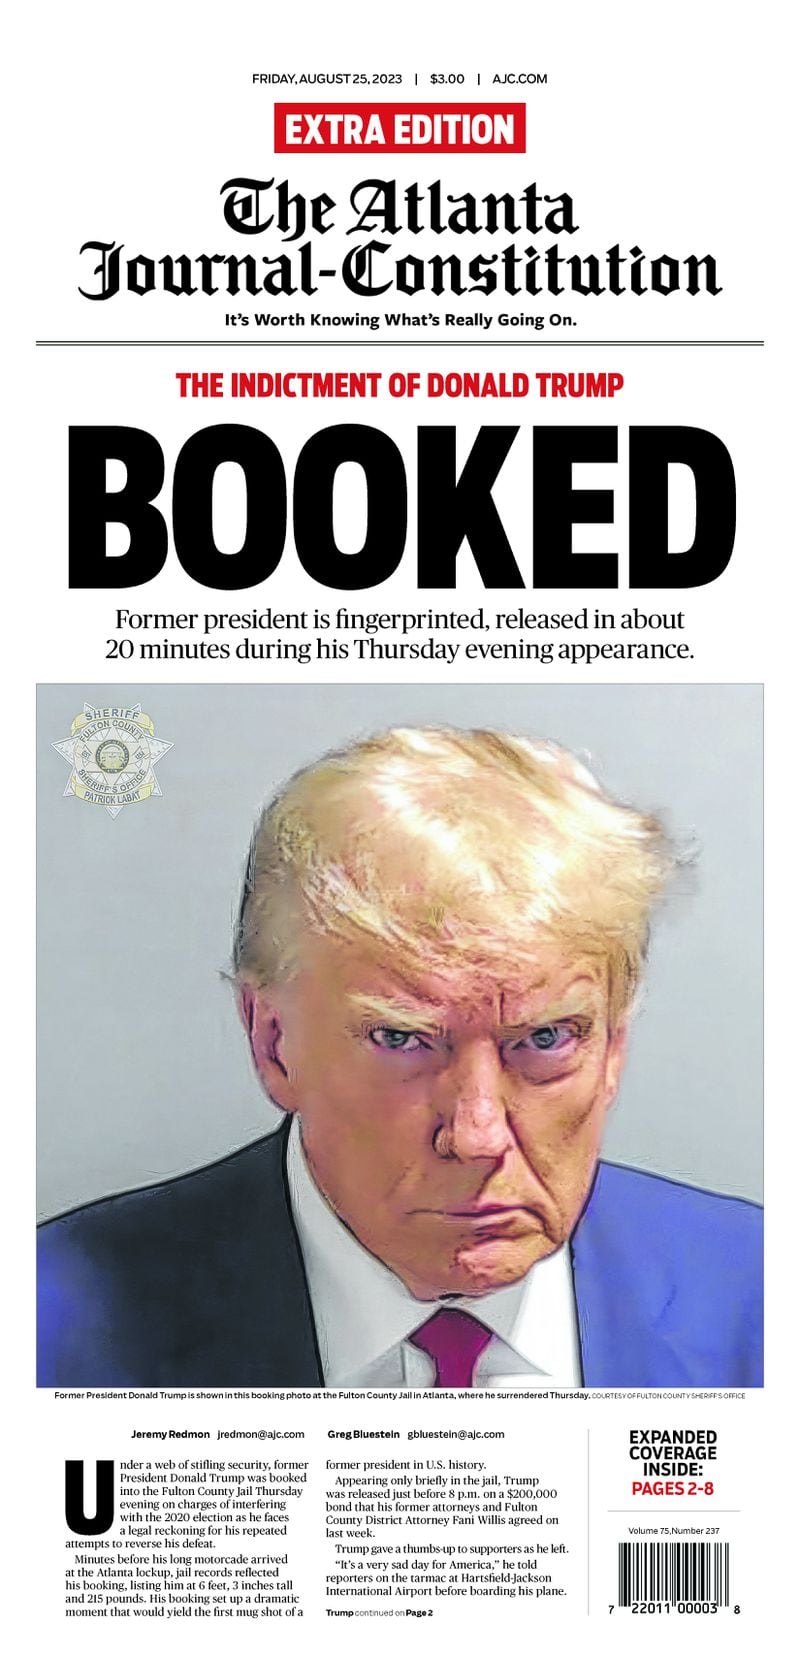 Front page of The Atlanta Journal-Constitution Friday Aug 25, 2023 with Donald Trump headline.